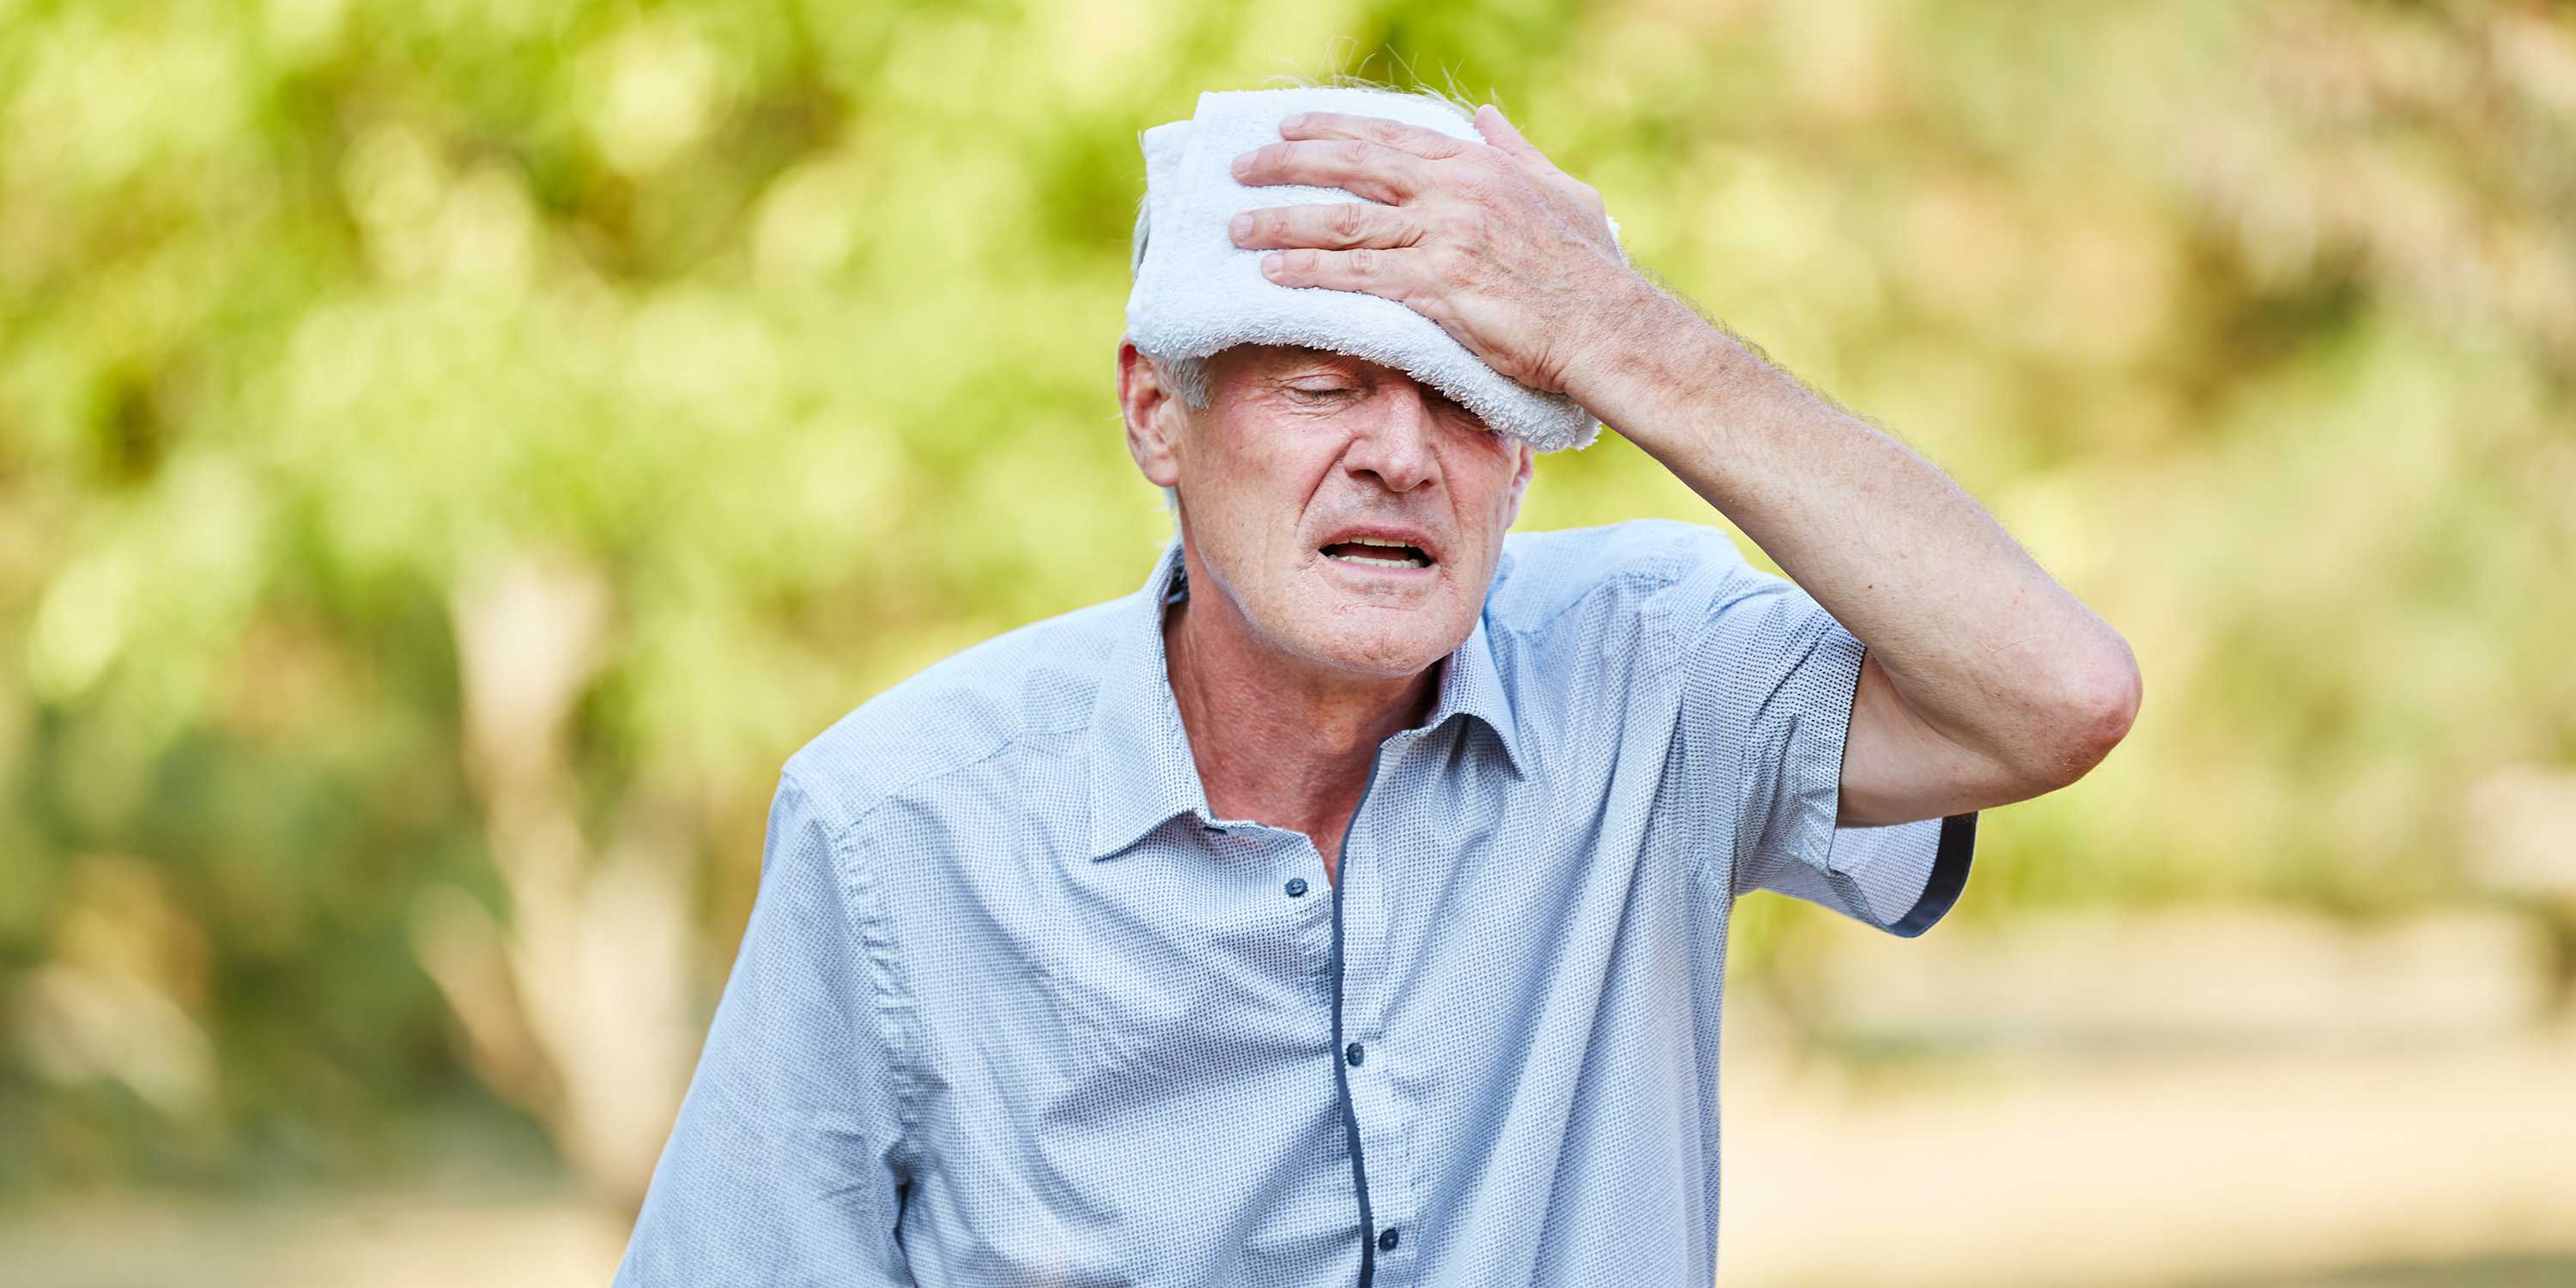 An old man holds a damp cloth to his forehead and contorts his face in suffering.